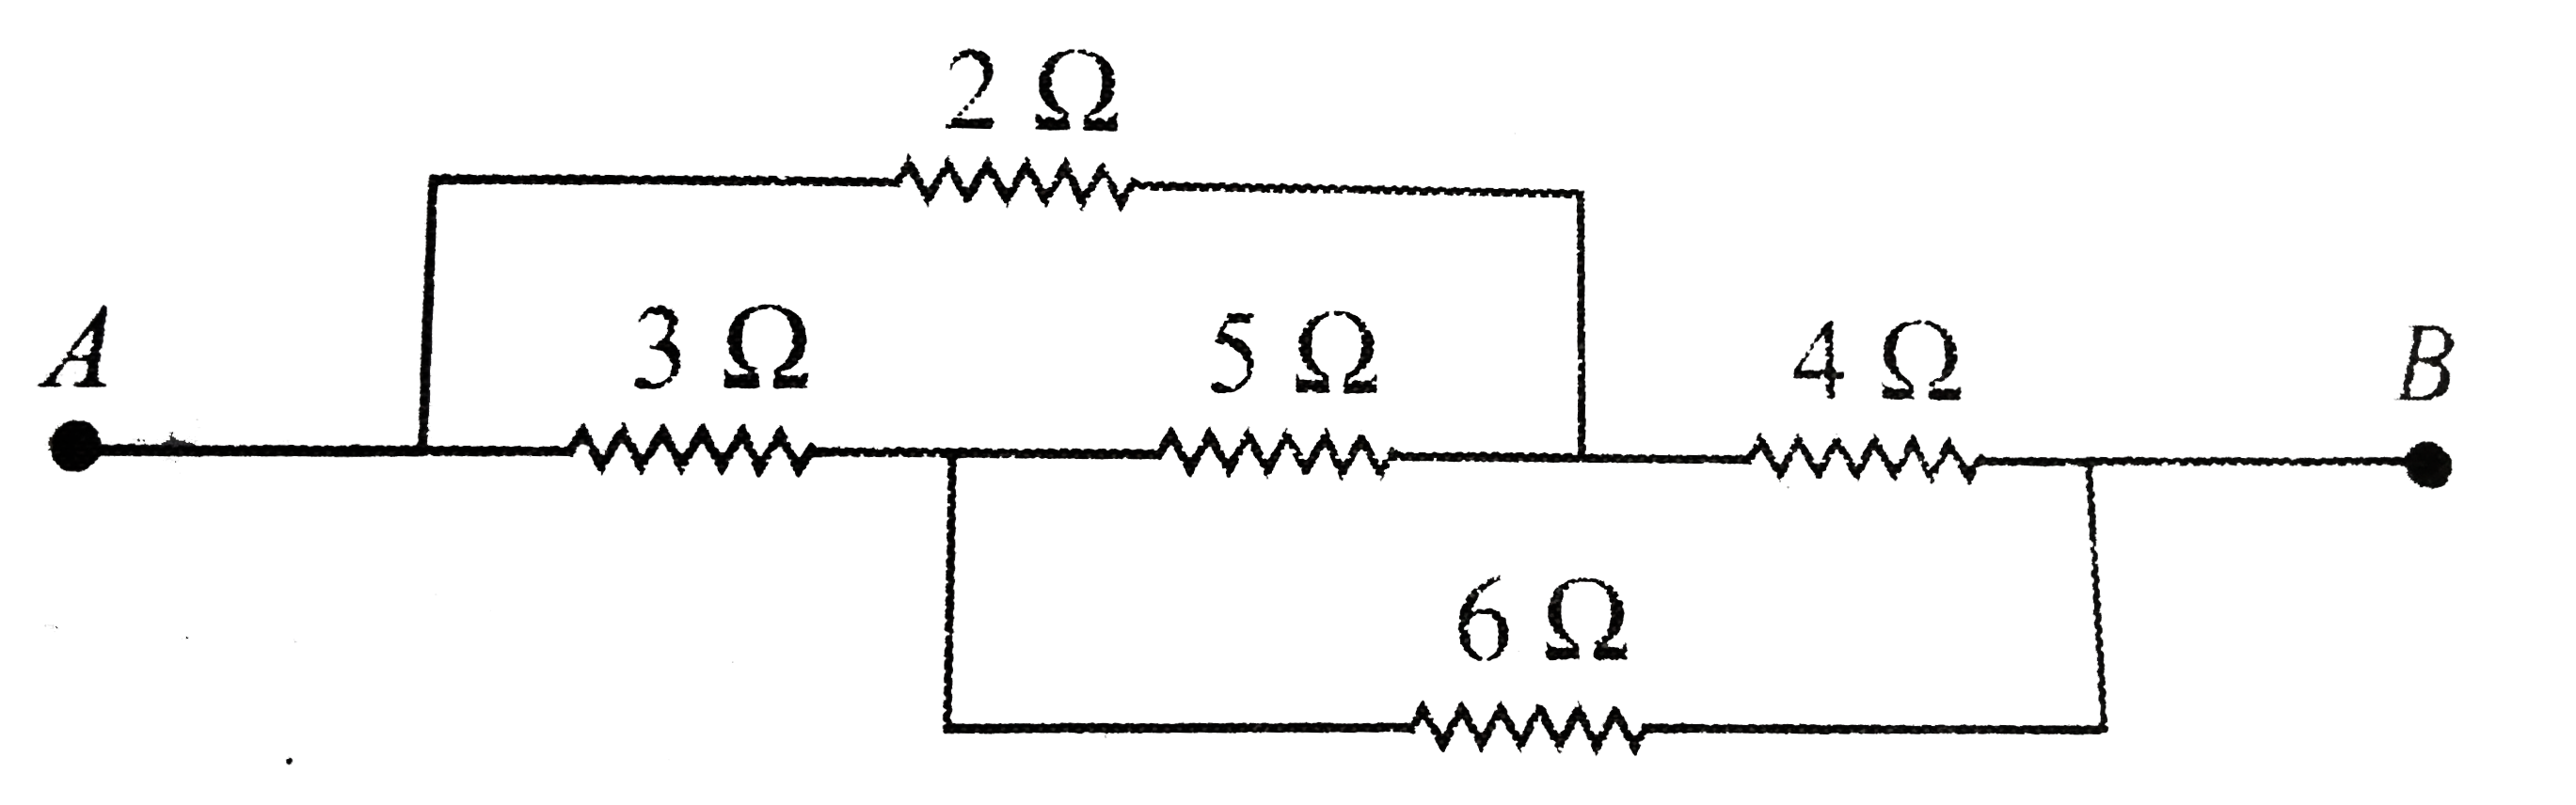 In the circuit shown in fig. some potential difference is applied between A and B. The equivalent resistance between A and B is R.